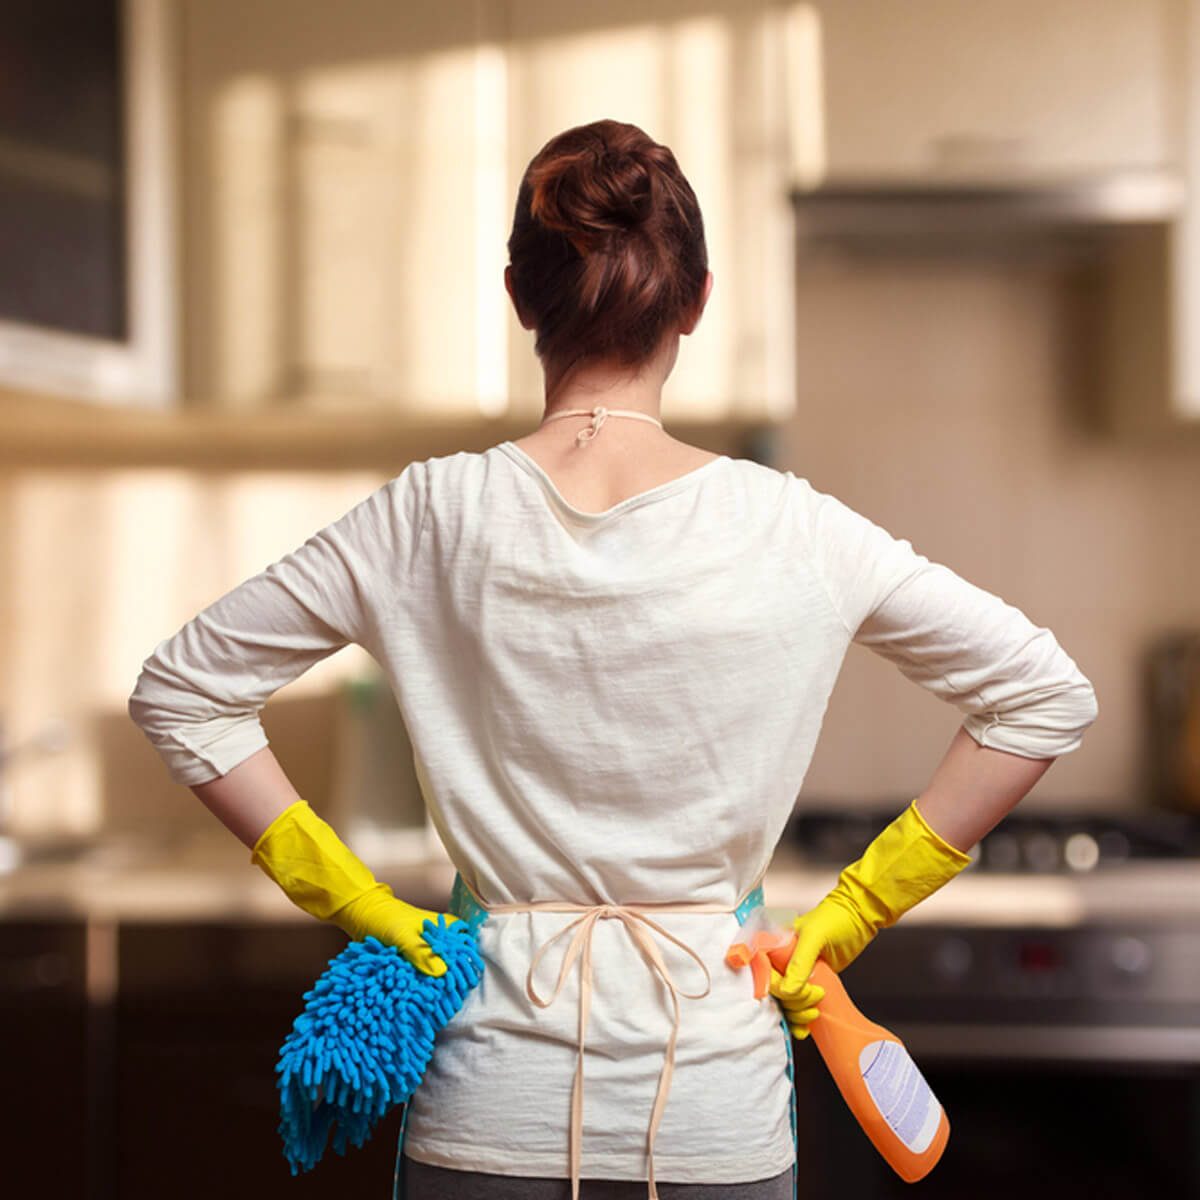 shutterstock_410558650 cleaning woman kitchen